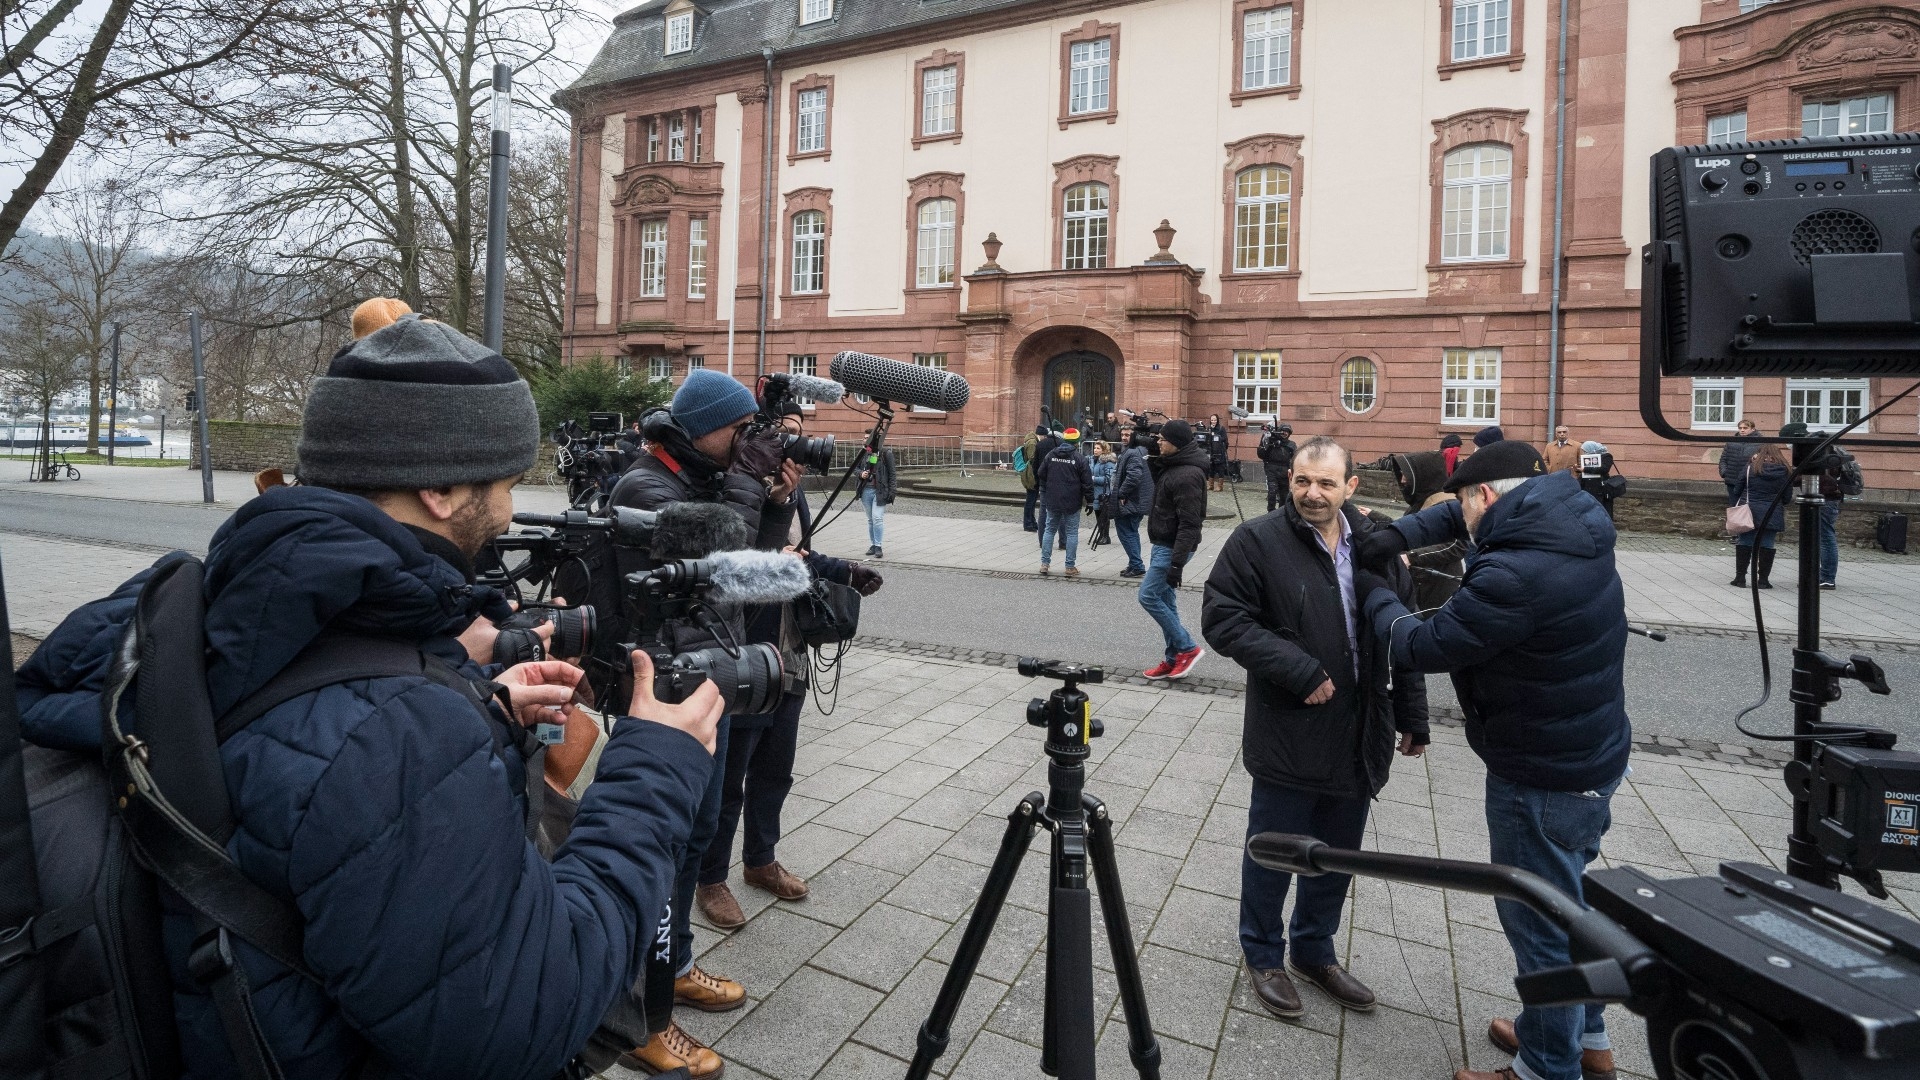 Journalists stand outside the courthouse in Koblenz, western Germany, on 13 January 2022, during the trial of former Syrian intelligence officer Anwar Raslan (AFP/File photo)